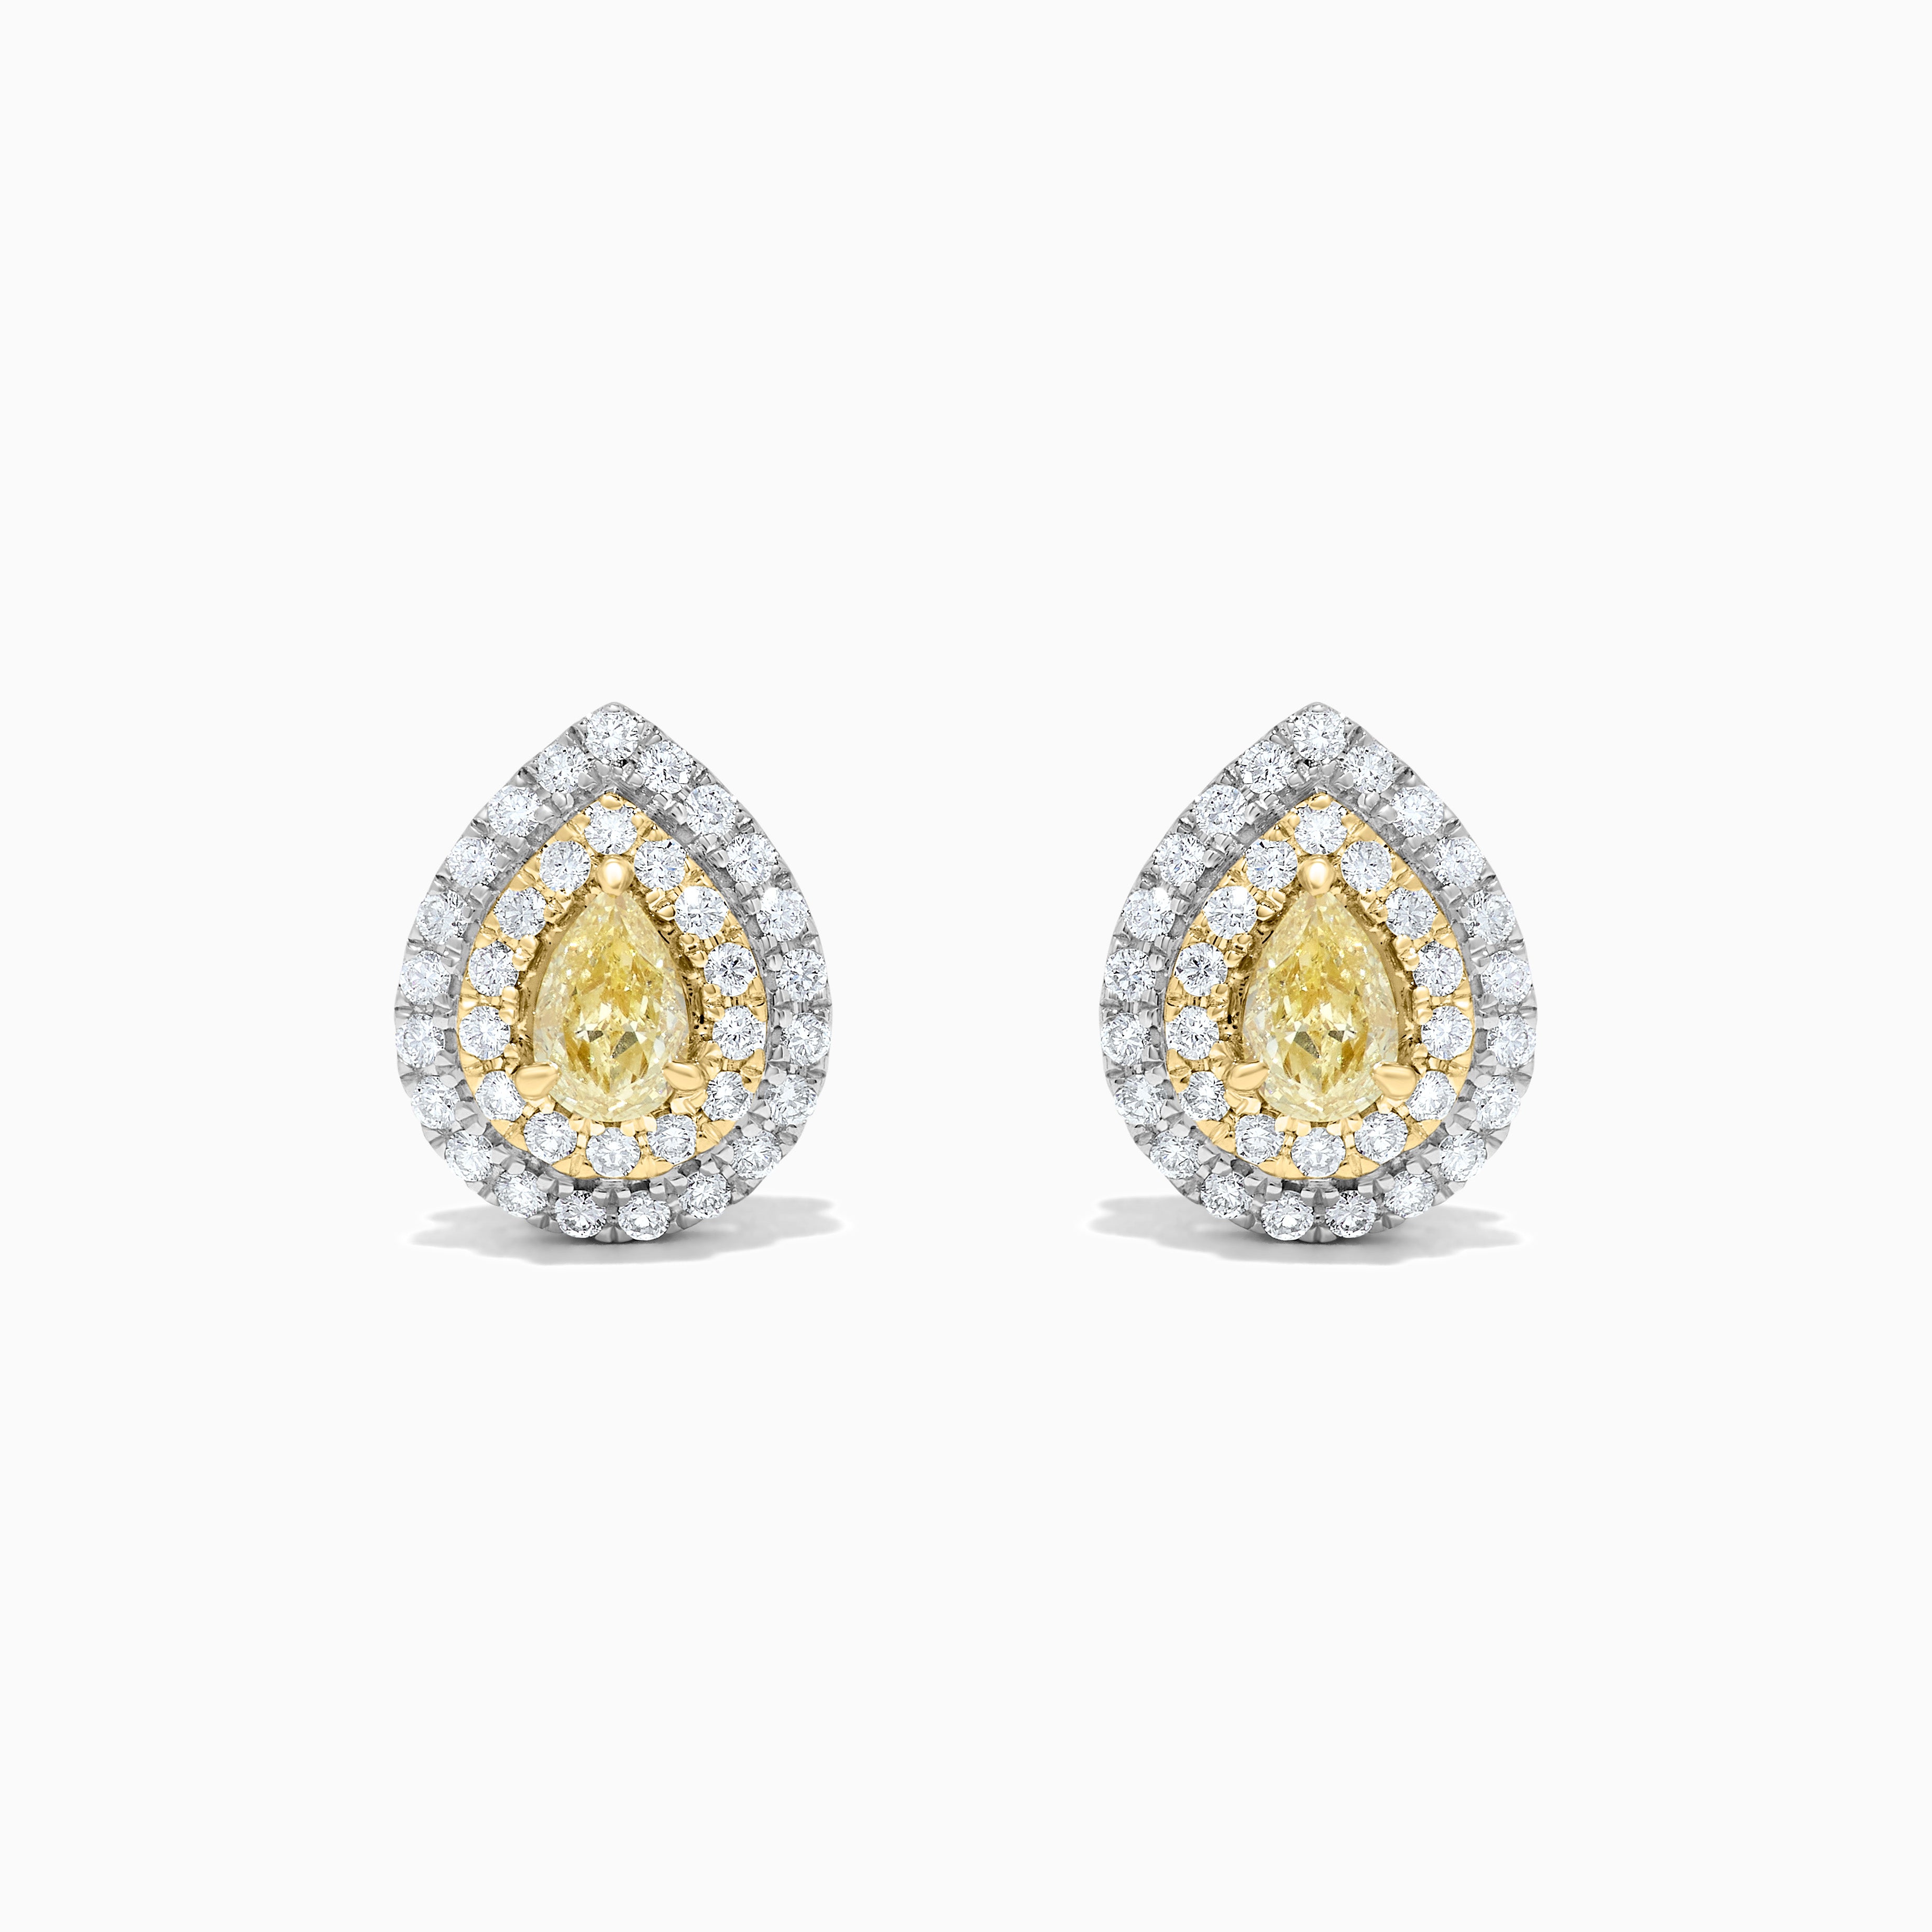 Natural Yellow Pear and White Diamond 1.14 Carat TW Gold Stud Earrings